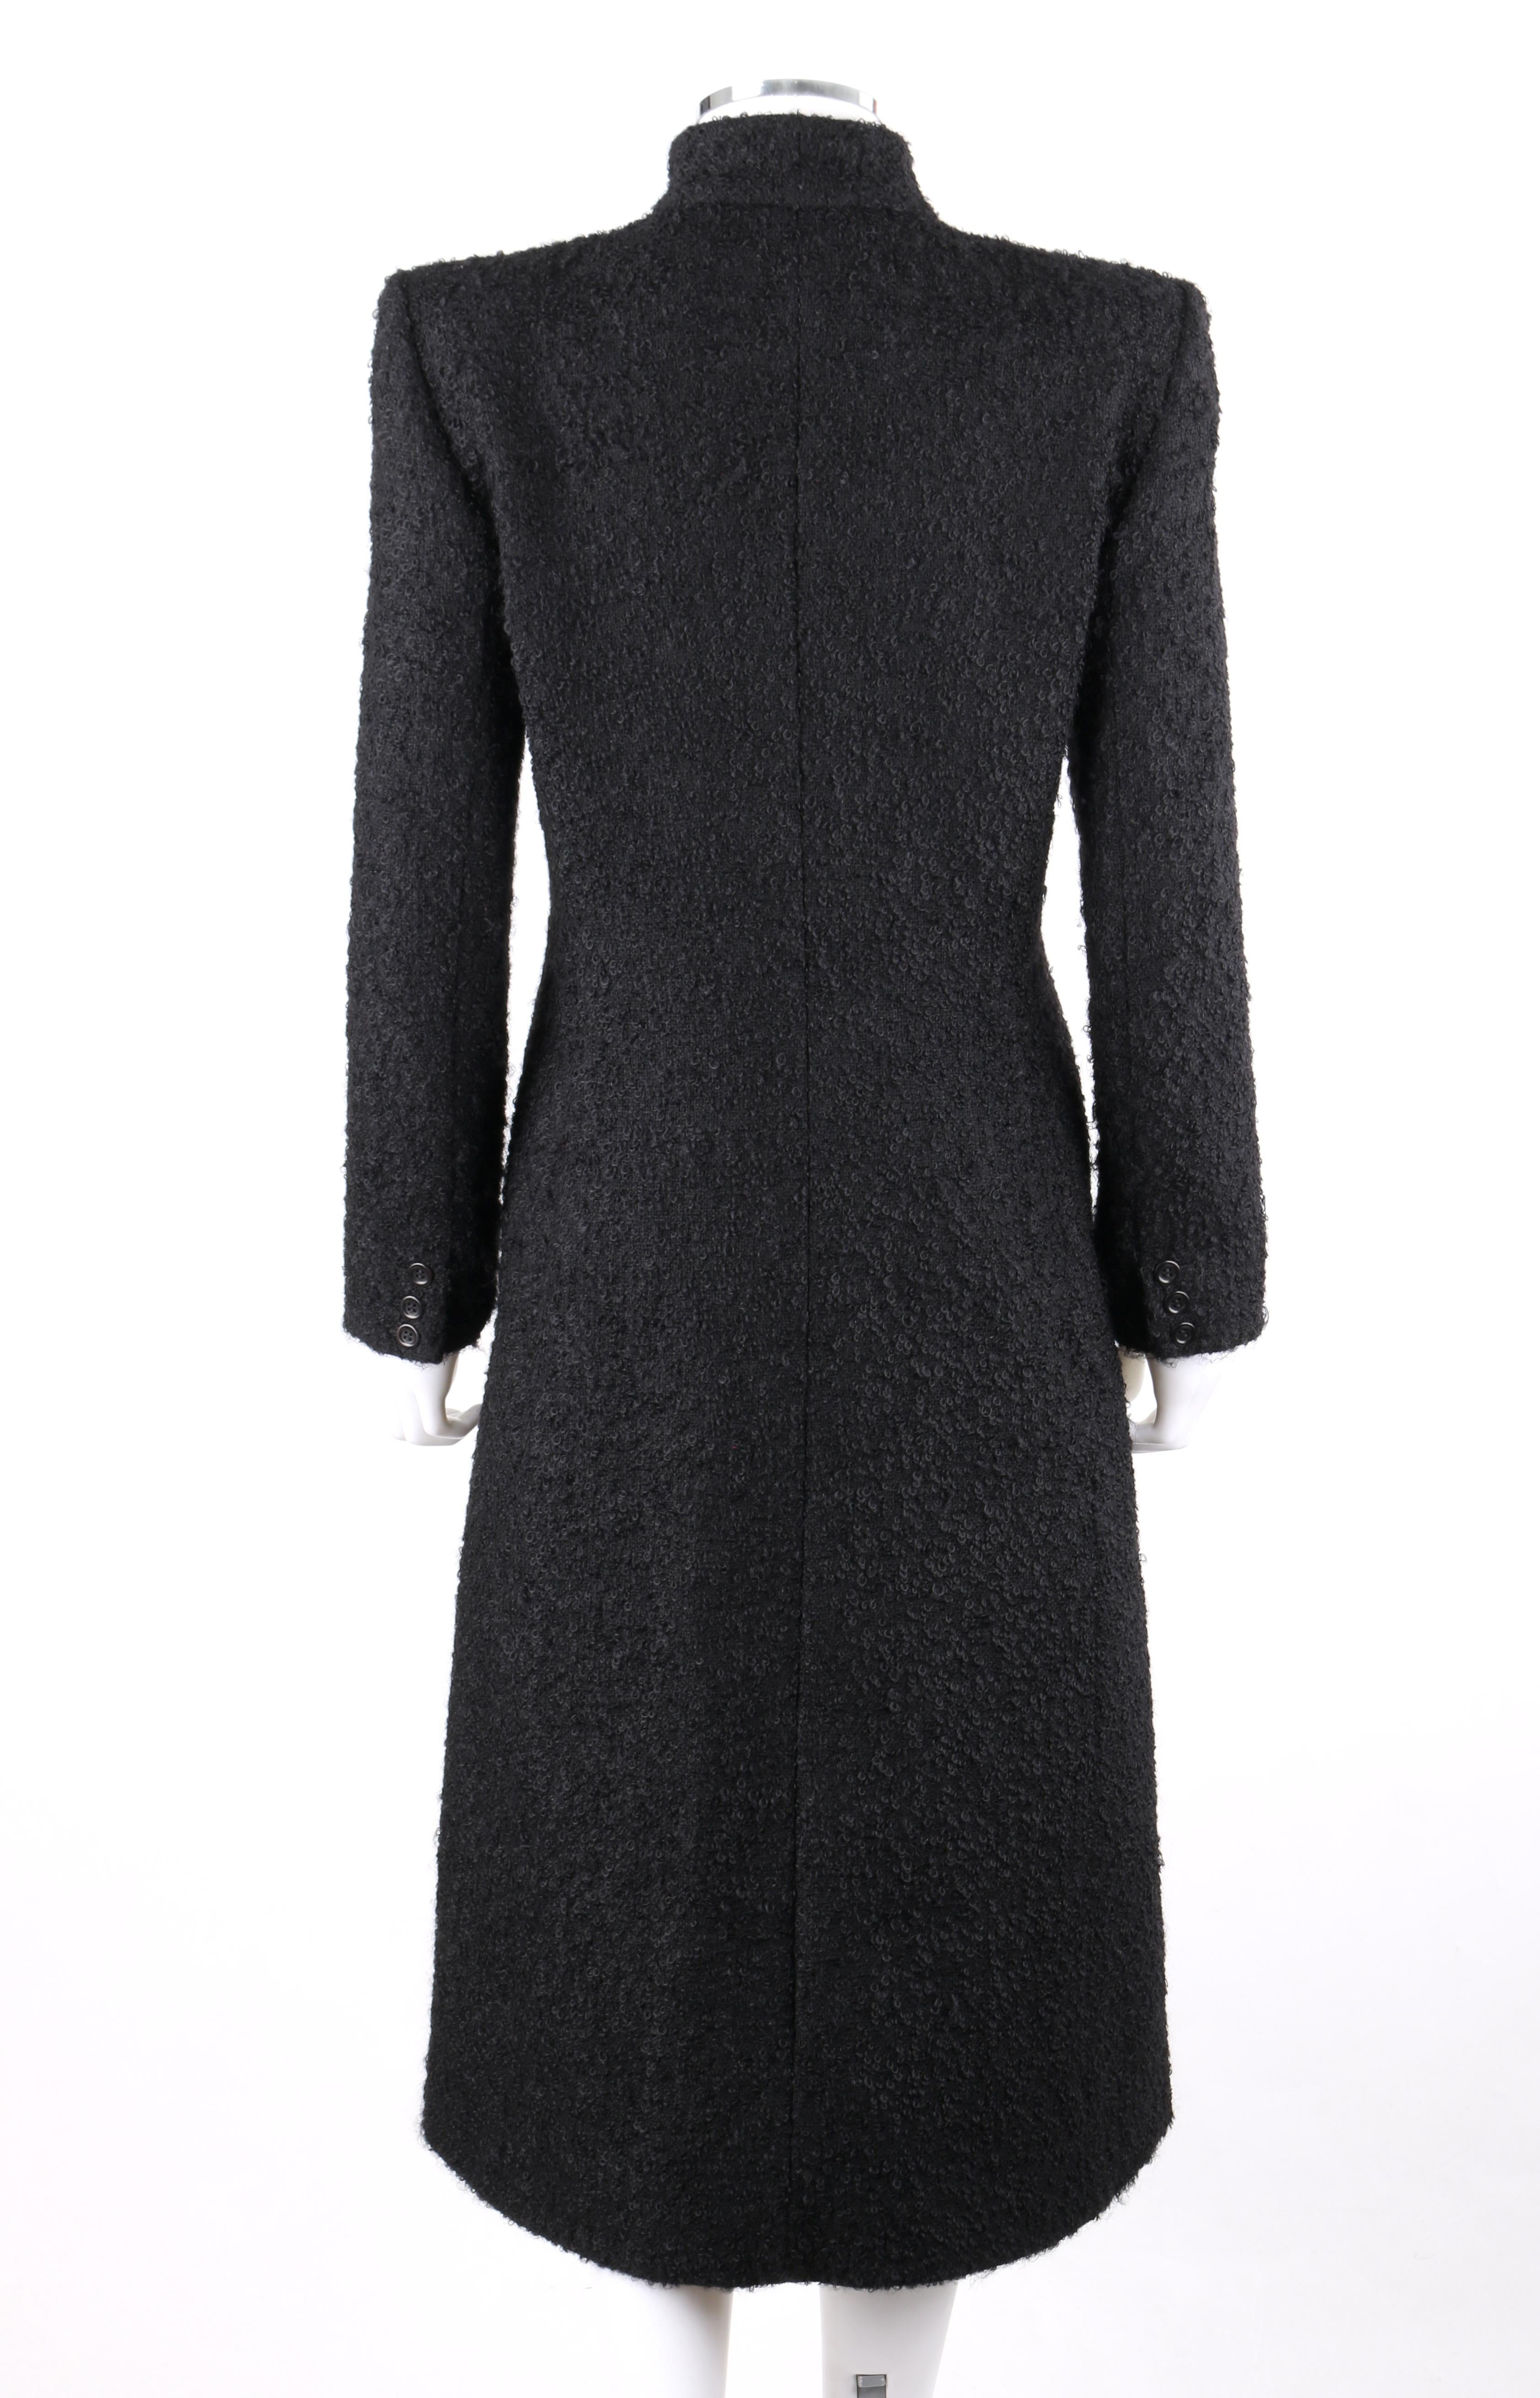 Black GIVENCHY Couture A/W 1998 ALEXANDER McQUEEN Mohair Exaggerated Shoulder Overcoat